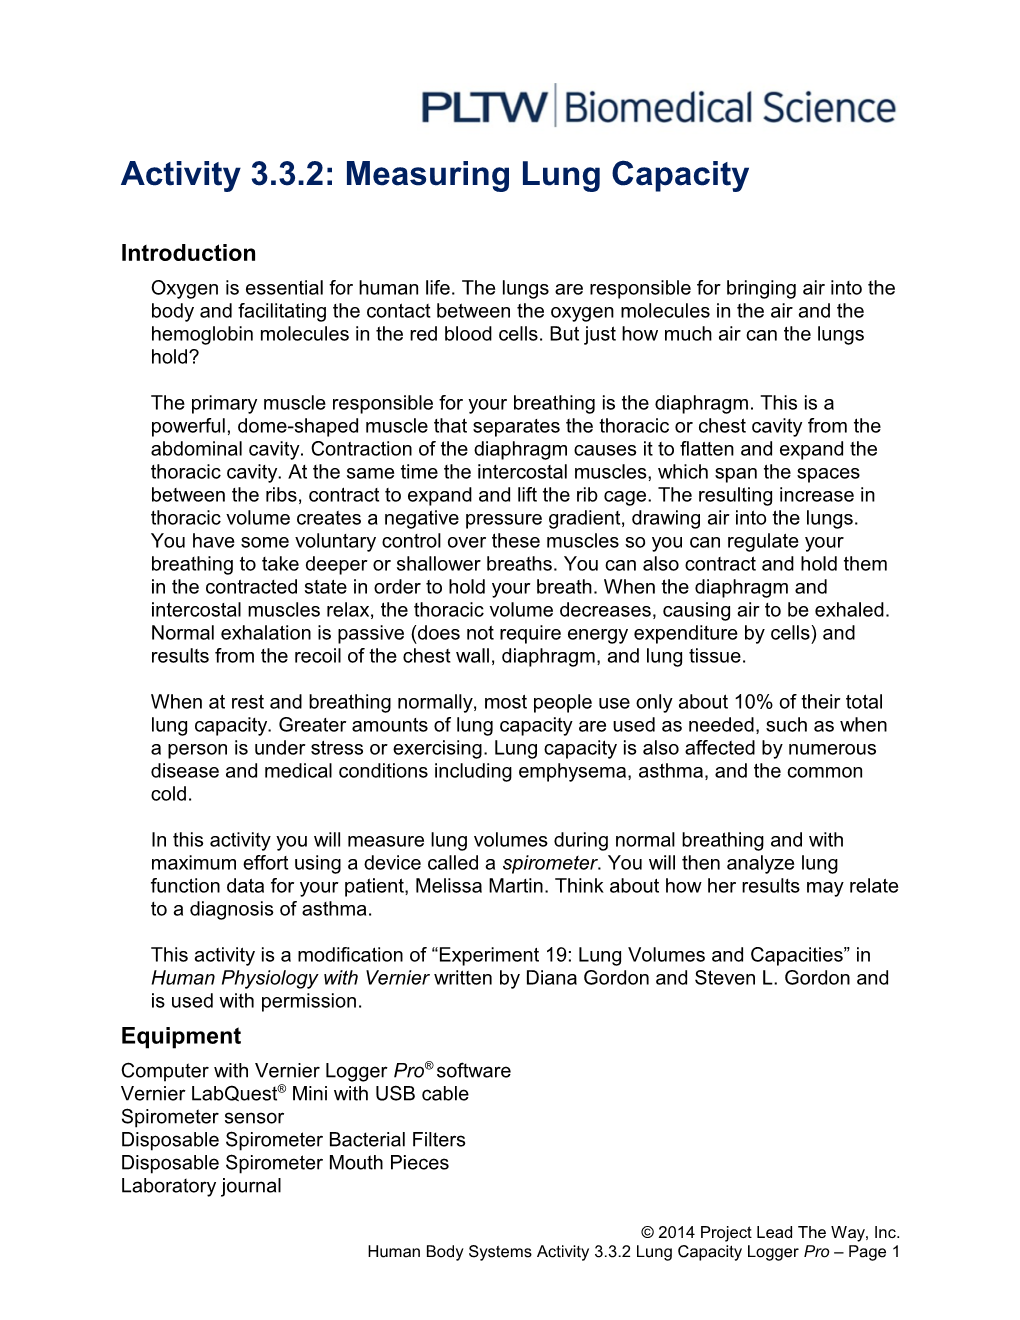 Activity 3.3.2: Measuring Lung Capacity